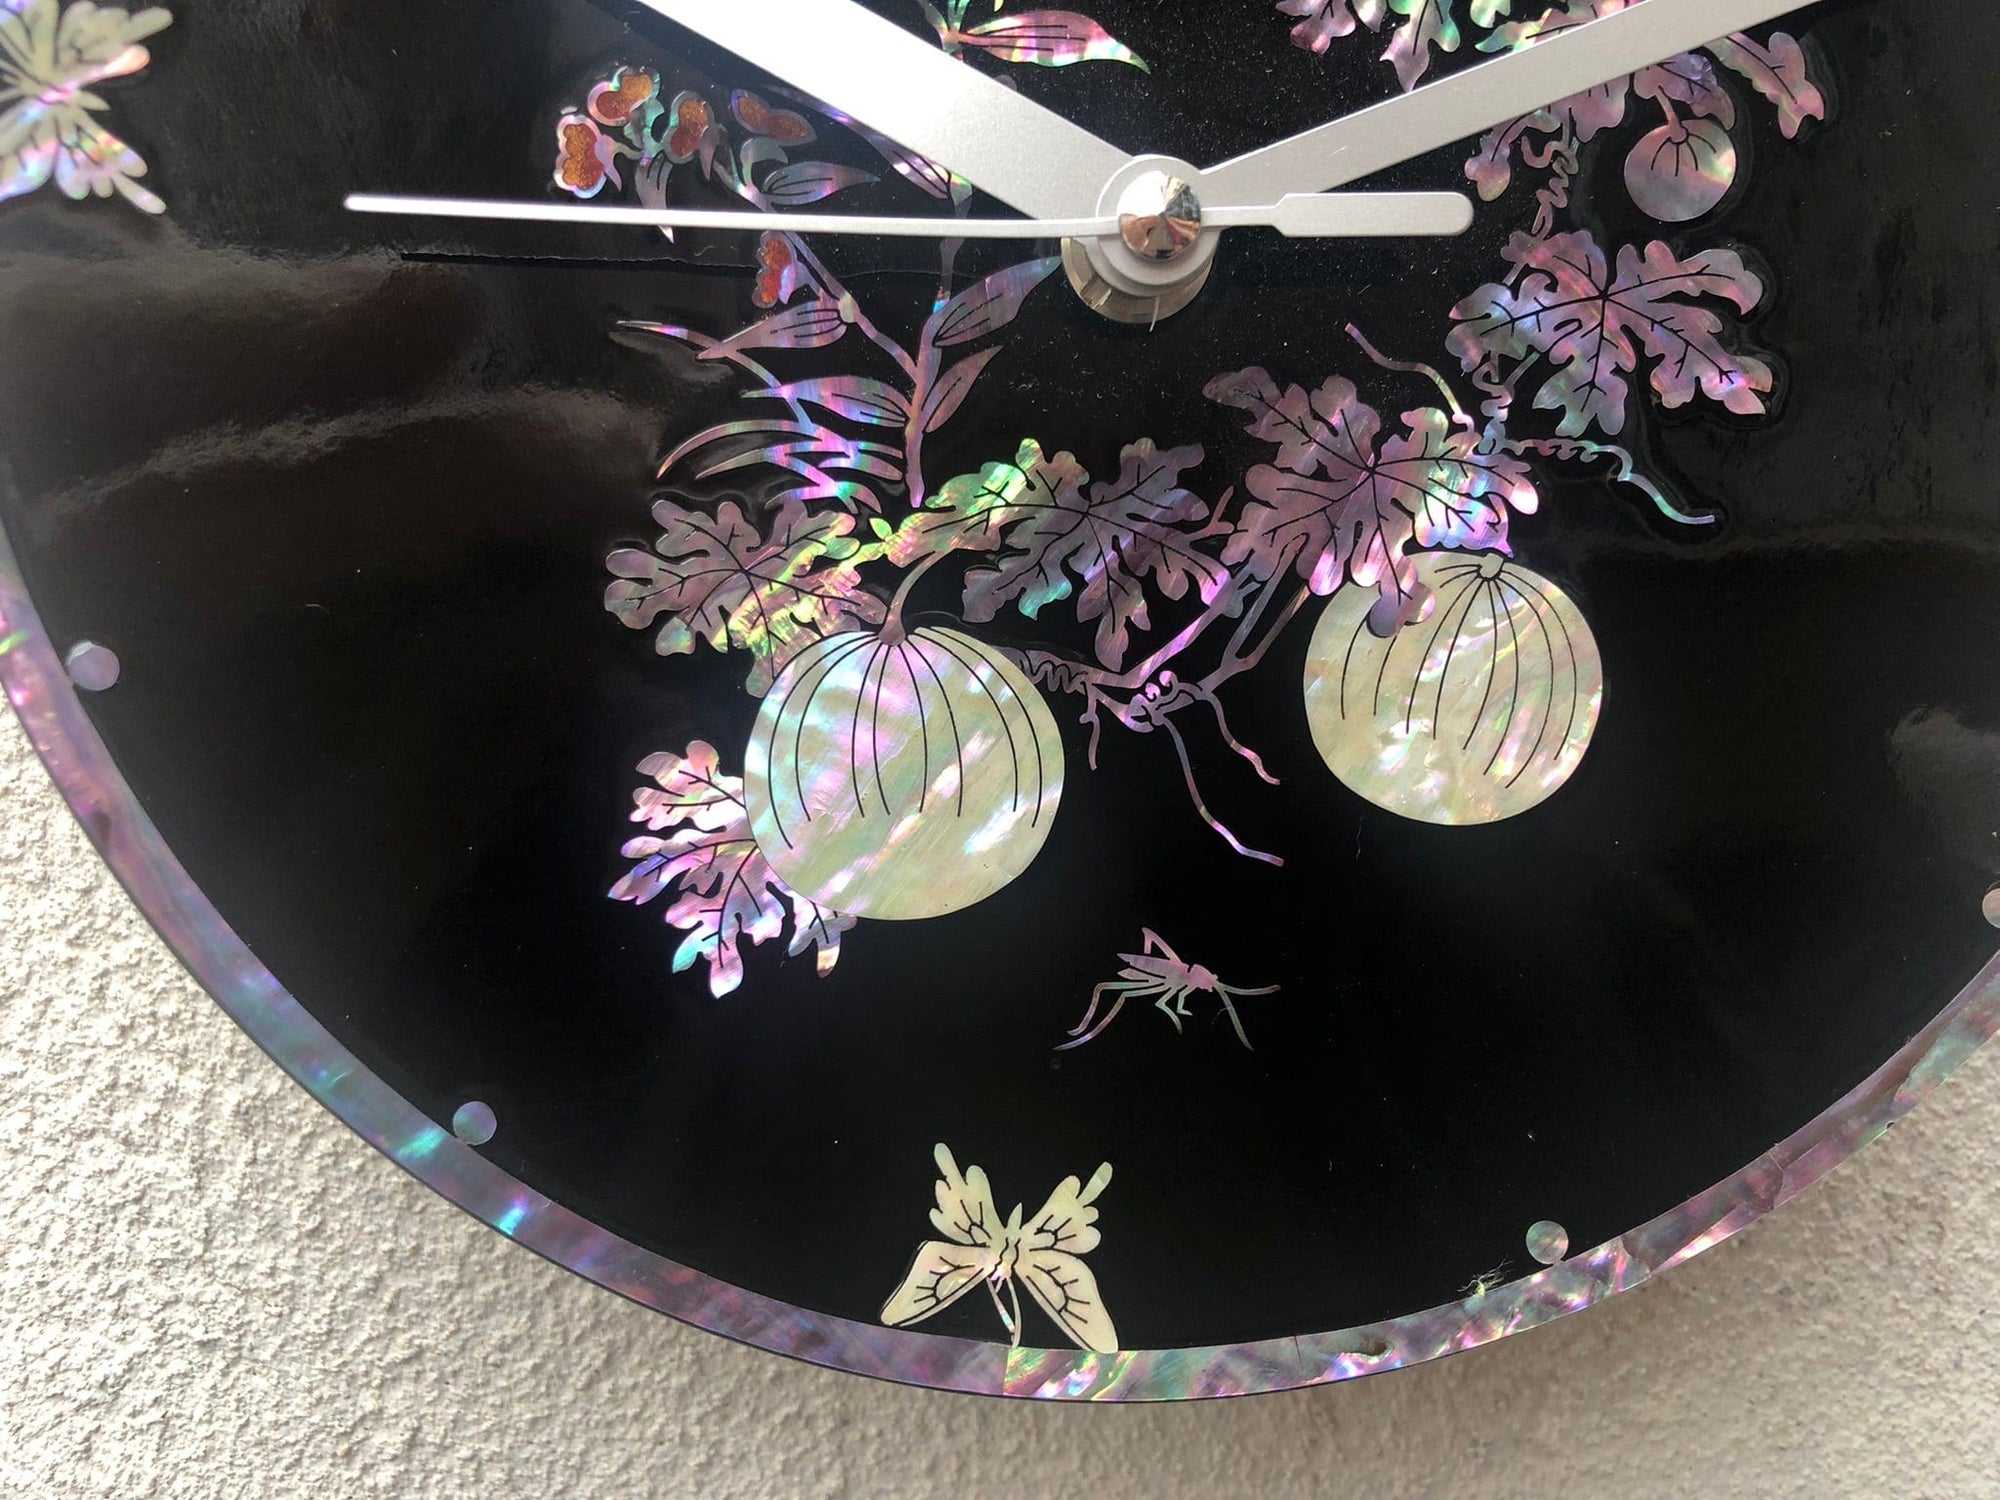 I Like Mike's Mid Century Modern Wall Clocks Small Round Asian Shell Inlay Black Lacquer Clock with Butterflies